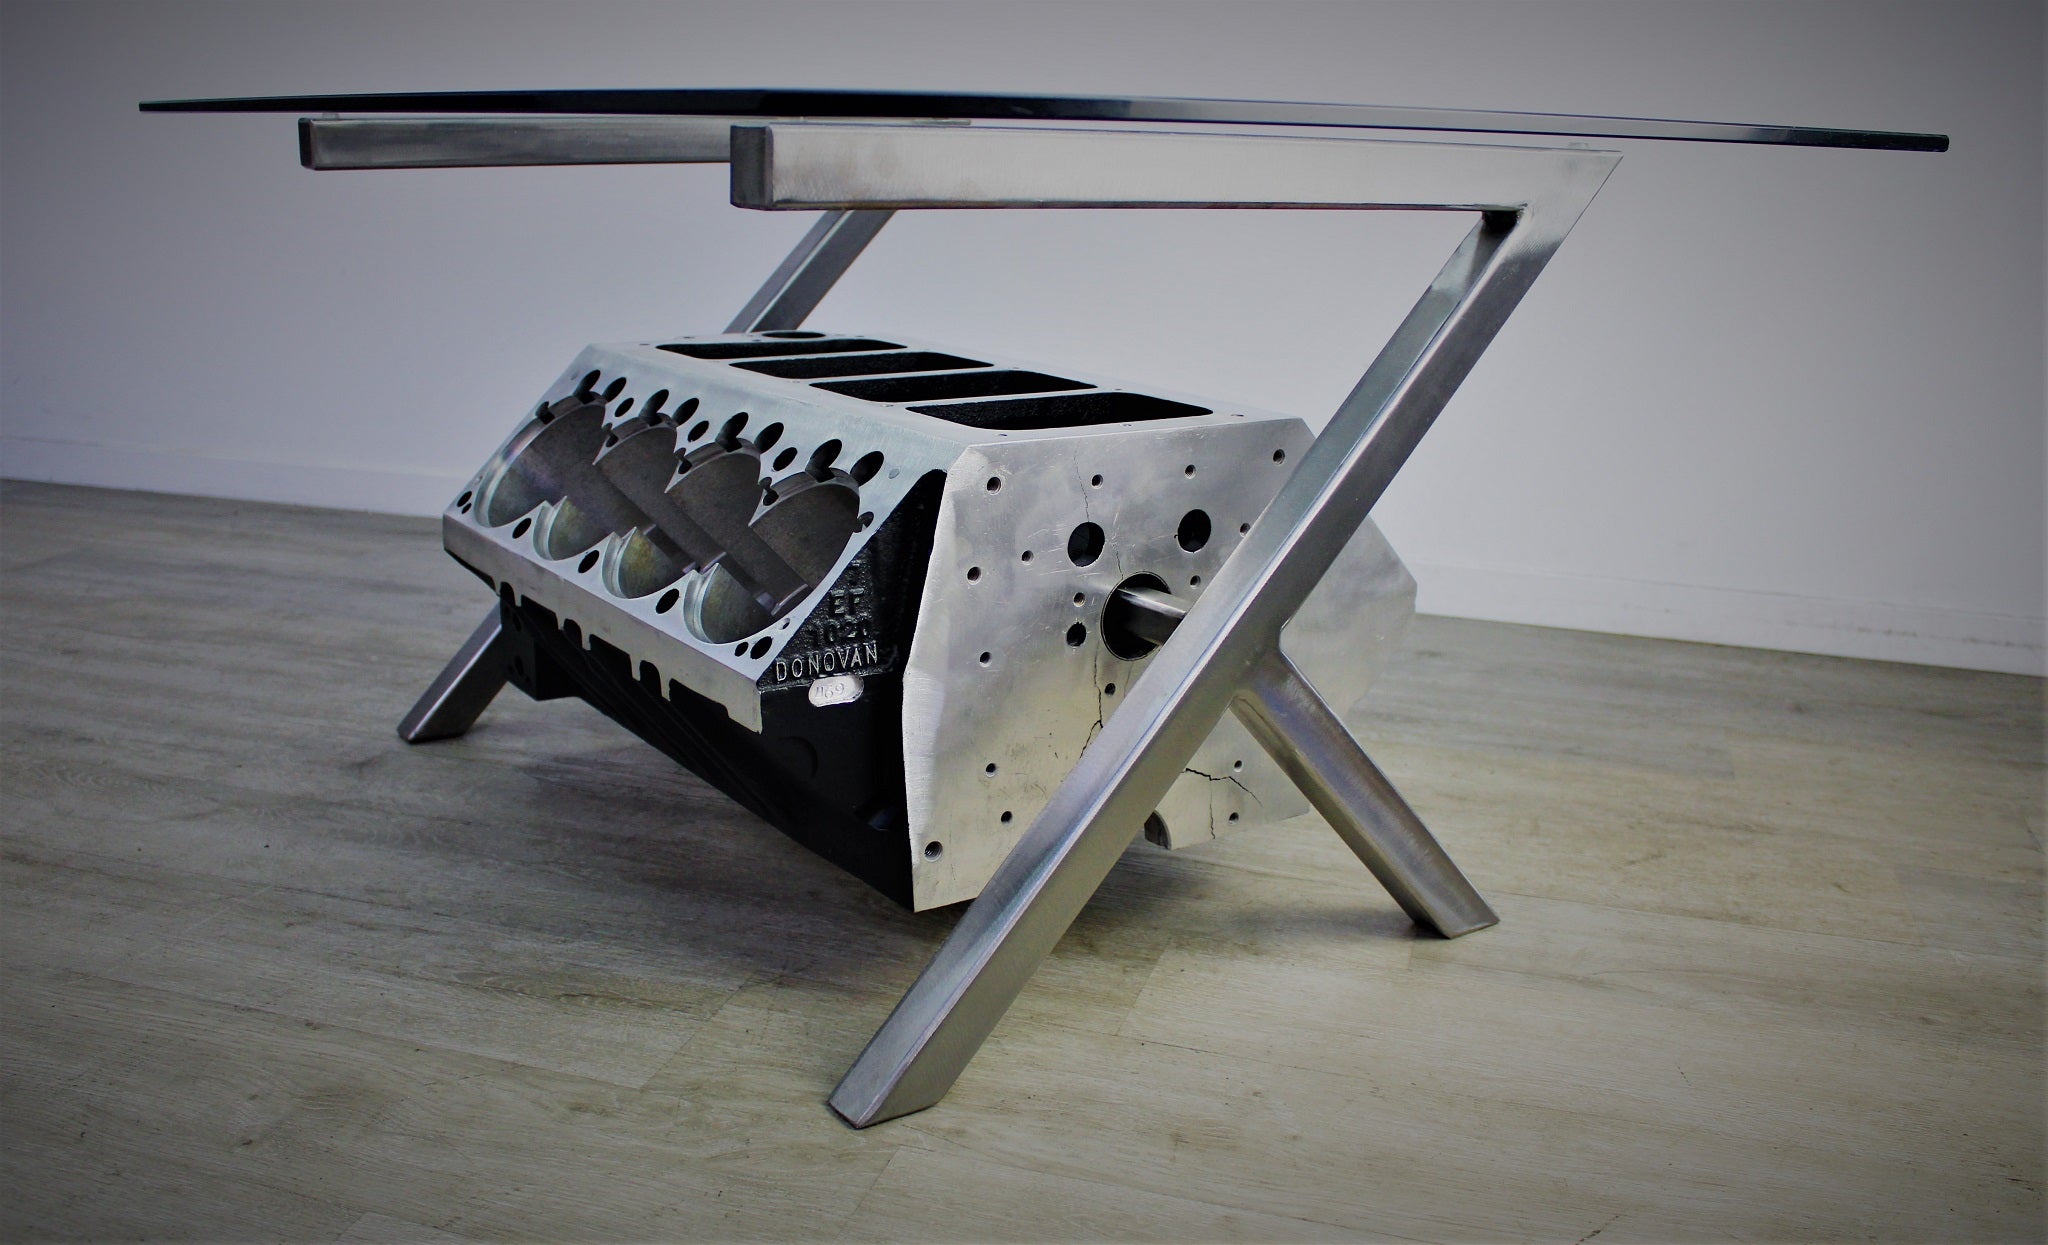 Top Fuel aluminum engine block coffee table finished in black and silver with a rectangular glass top.